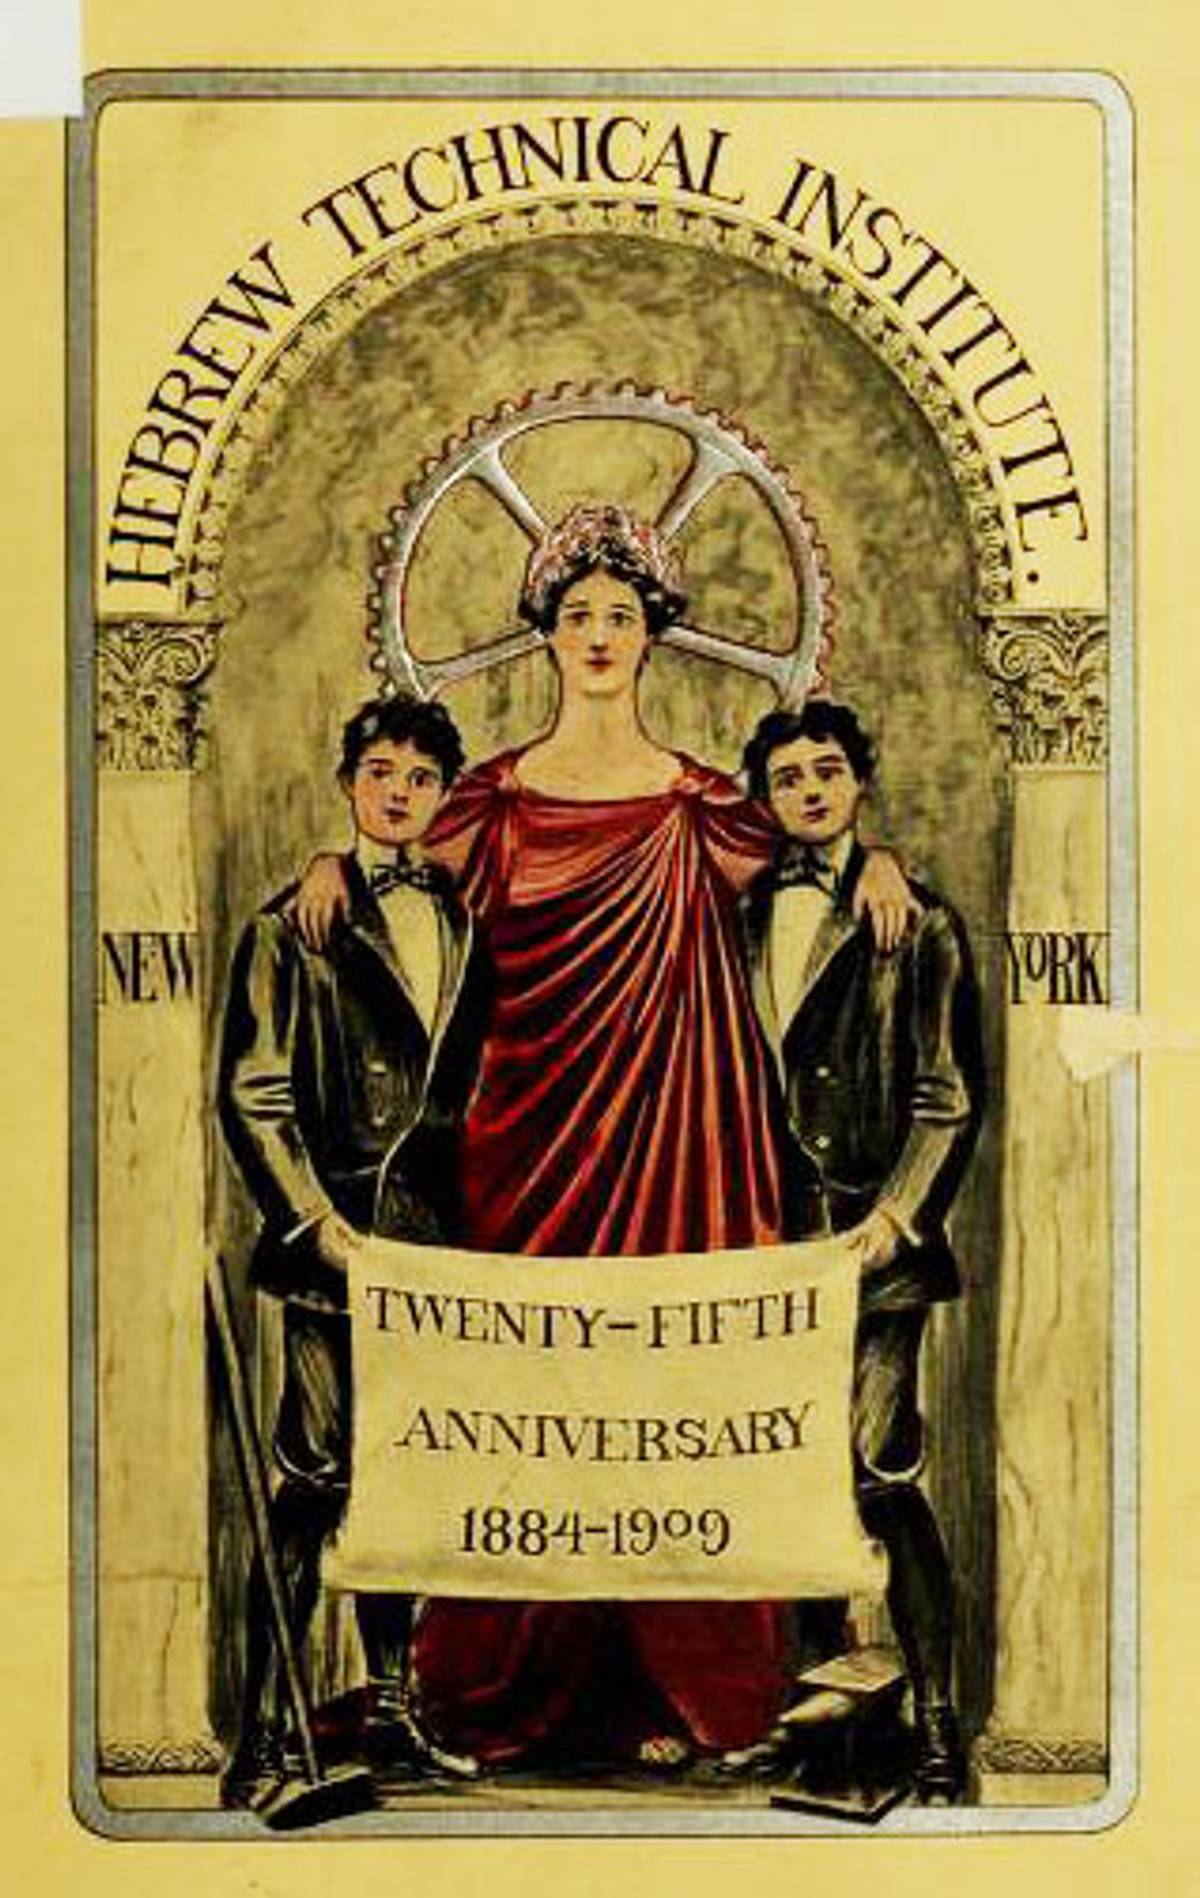 Over a century ago, the Hebrew Technical Institute for Boys made use of an arresting drawing of a woman flanked by two boys to characterize its aspirations